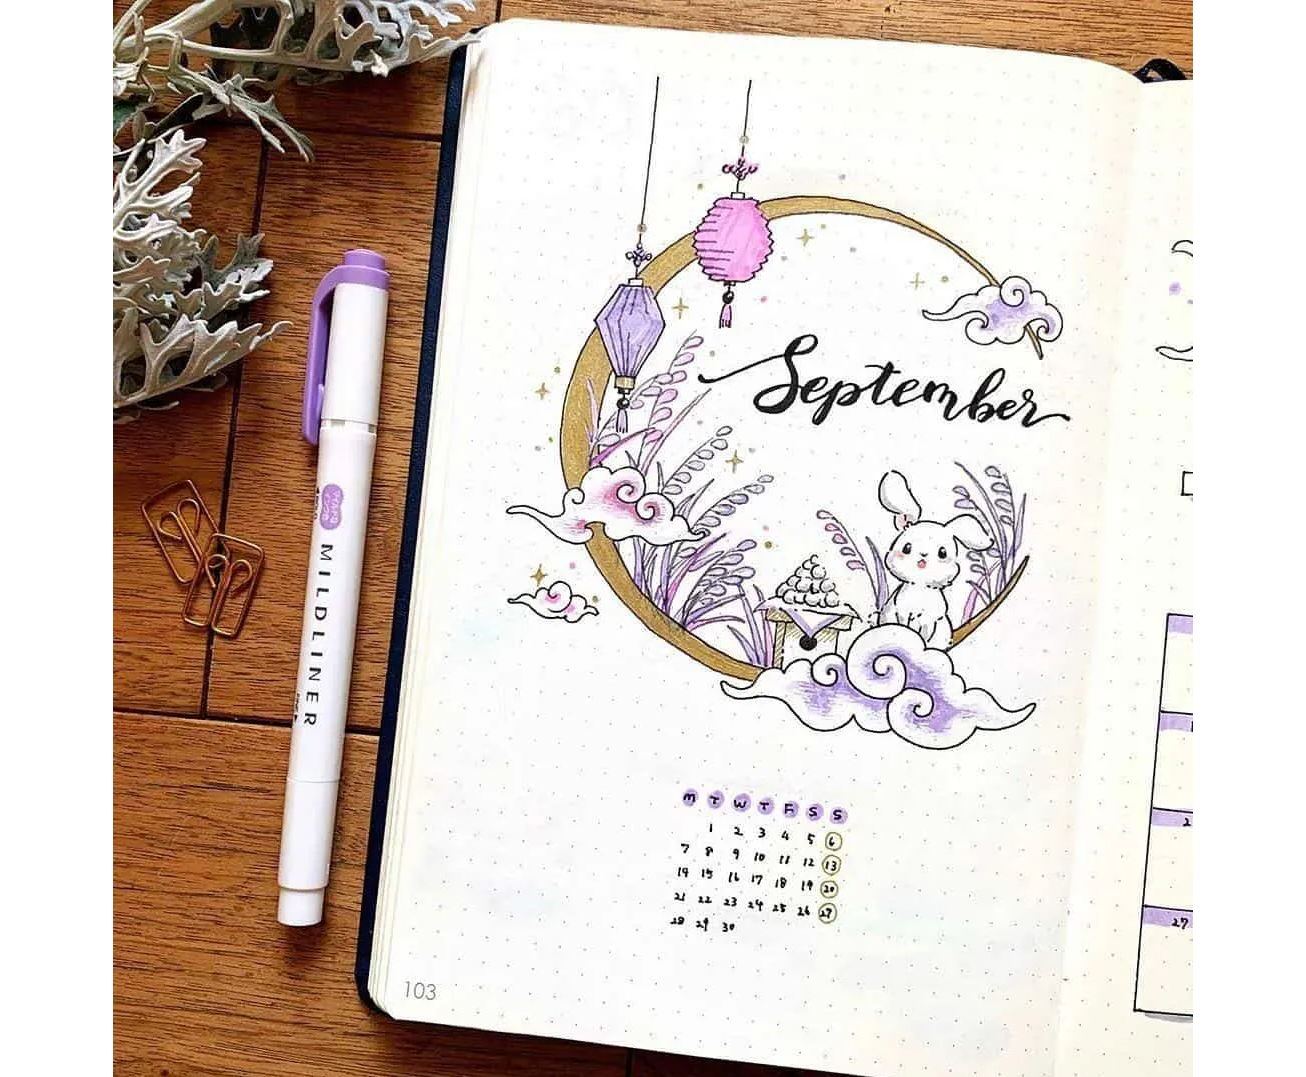 September cover page - Mid-Autumn festival theme with rabbits, moons and clouds